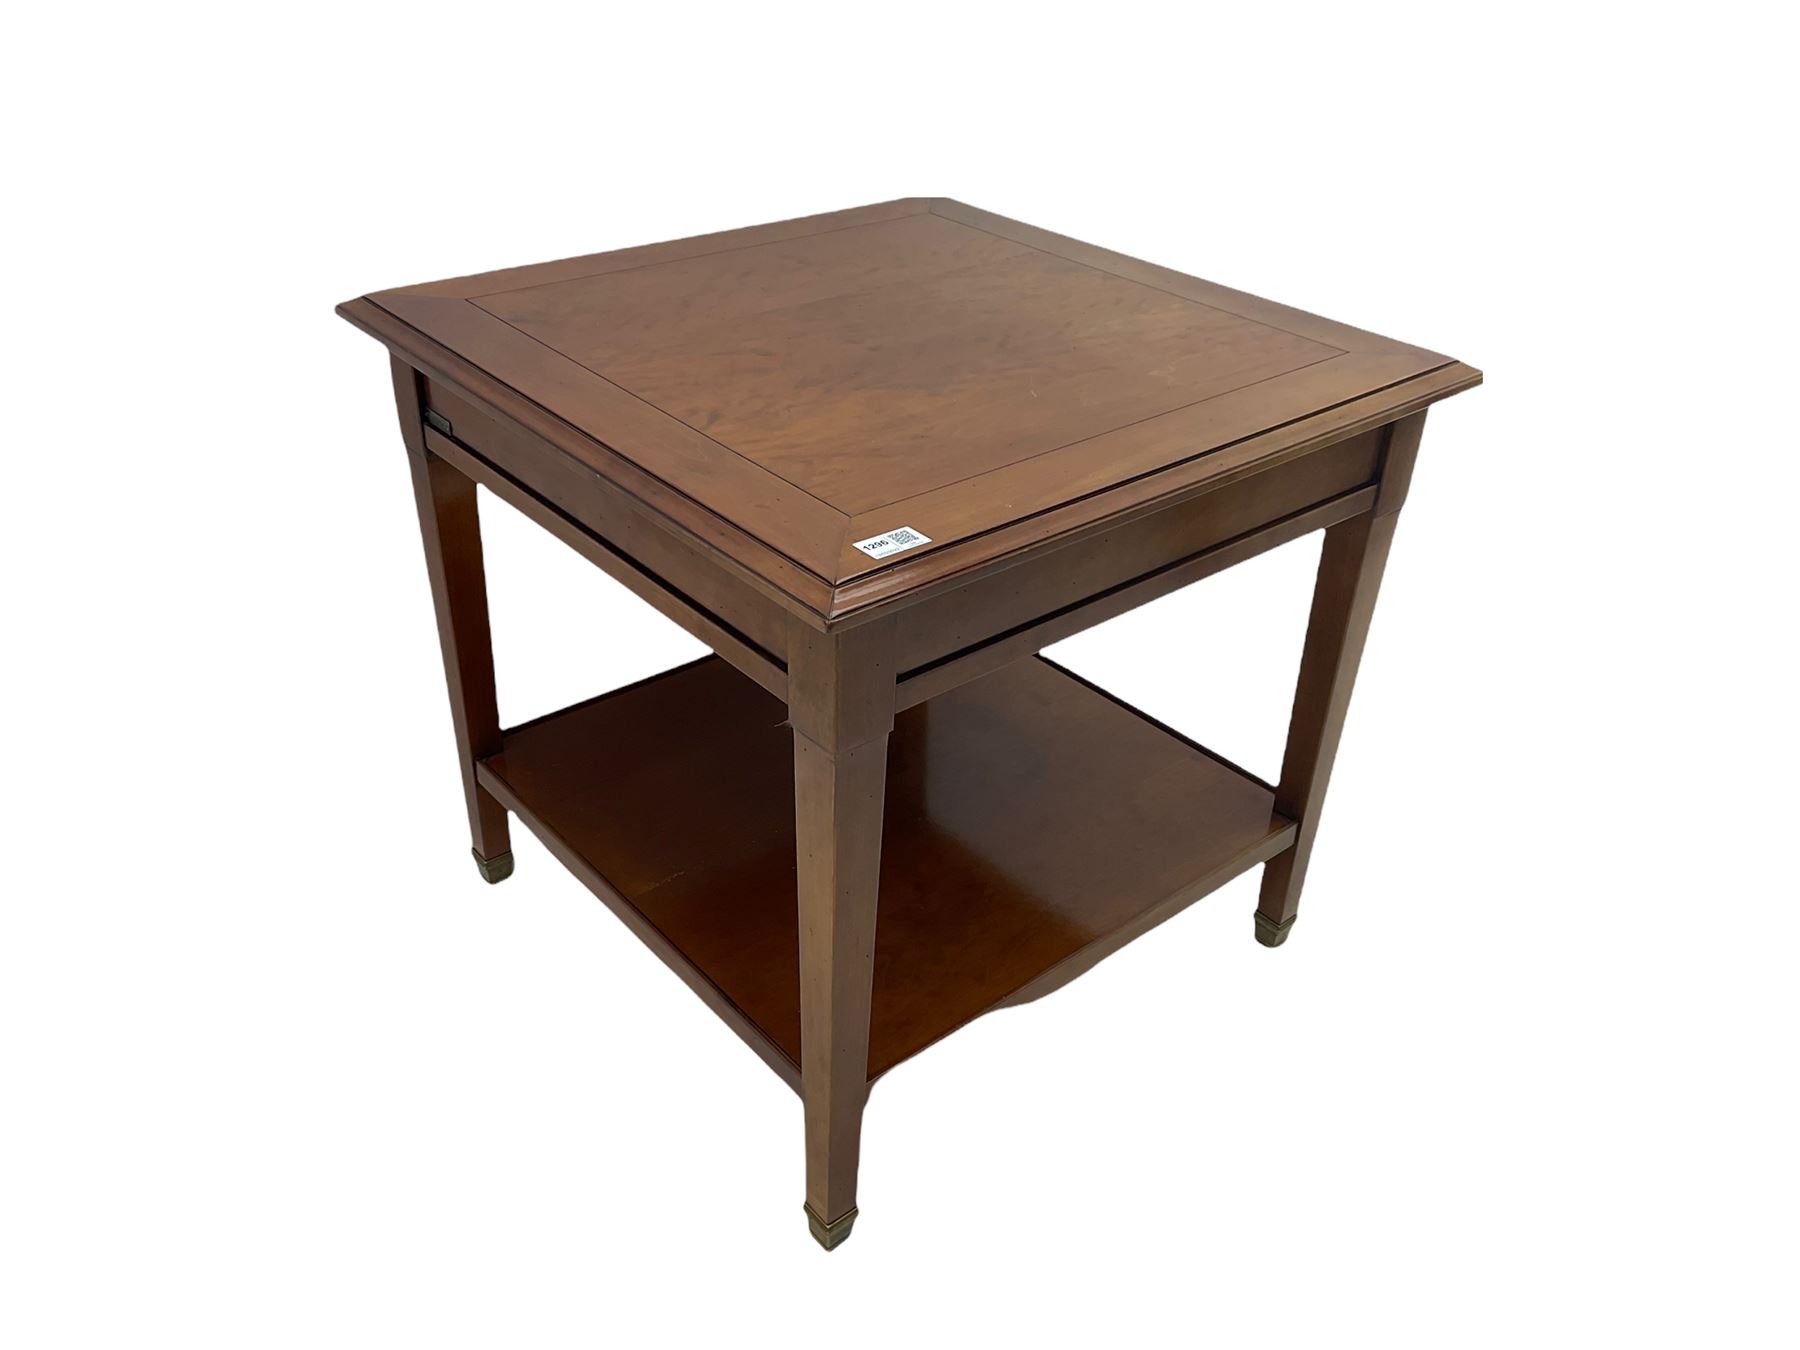 Grange Furniture cherry wood square lamp table - Image 4 of 5